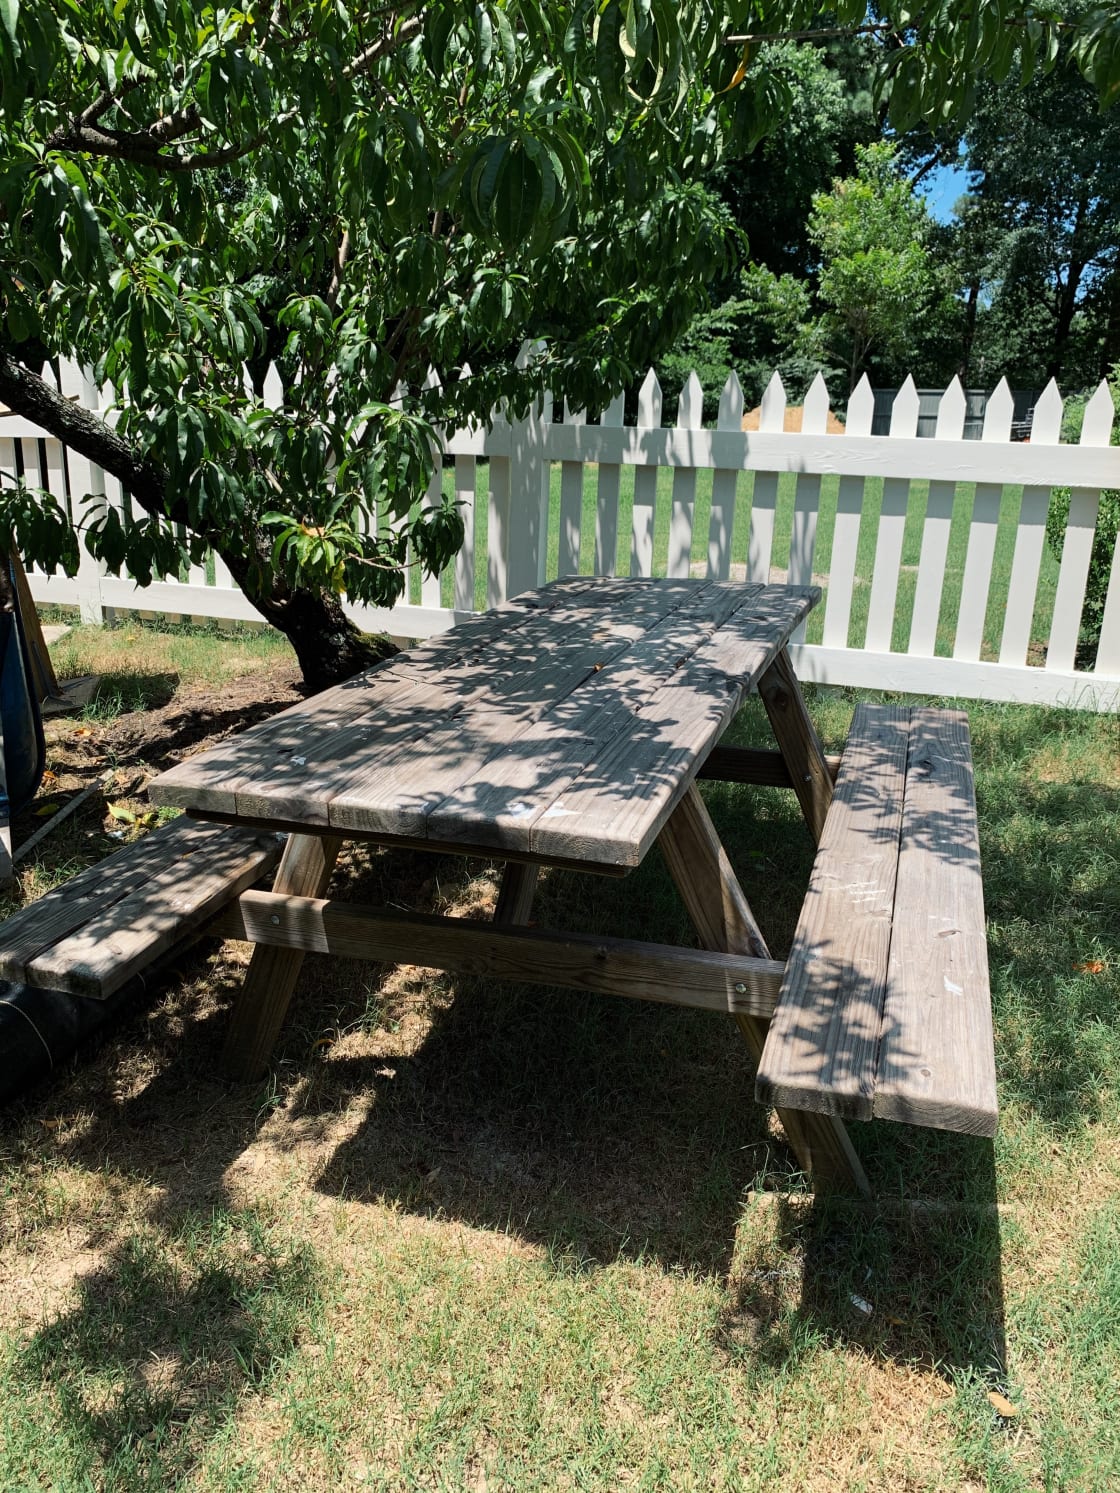 picnic table for meals